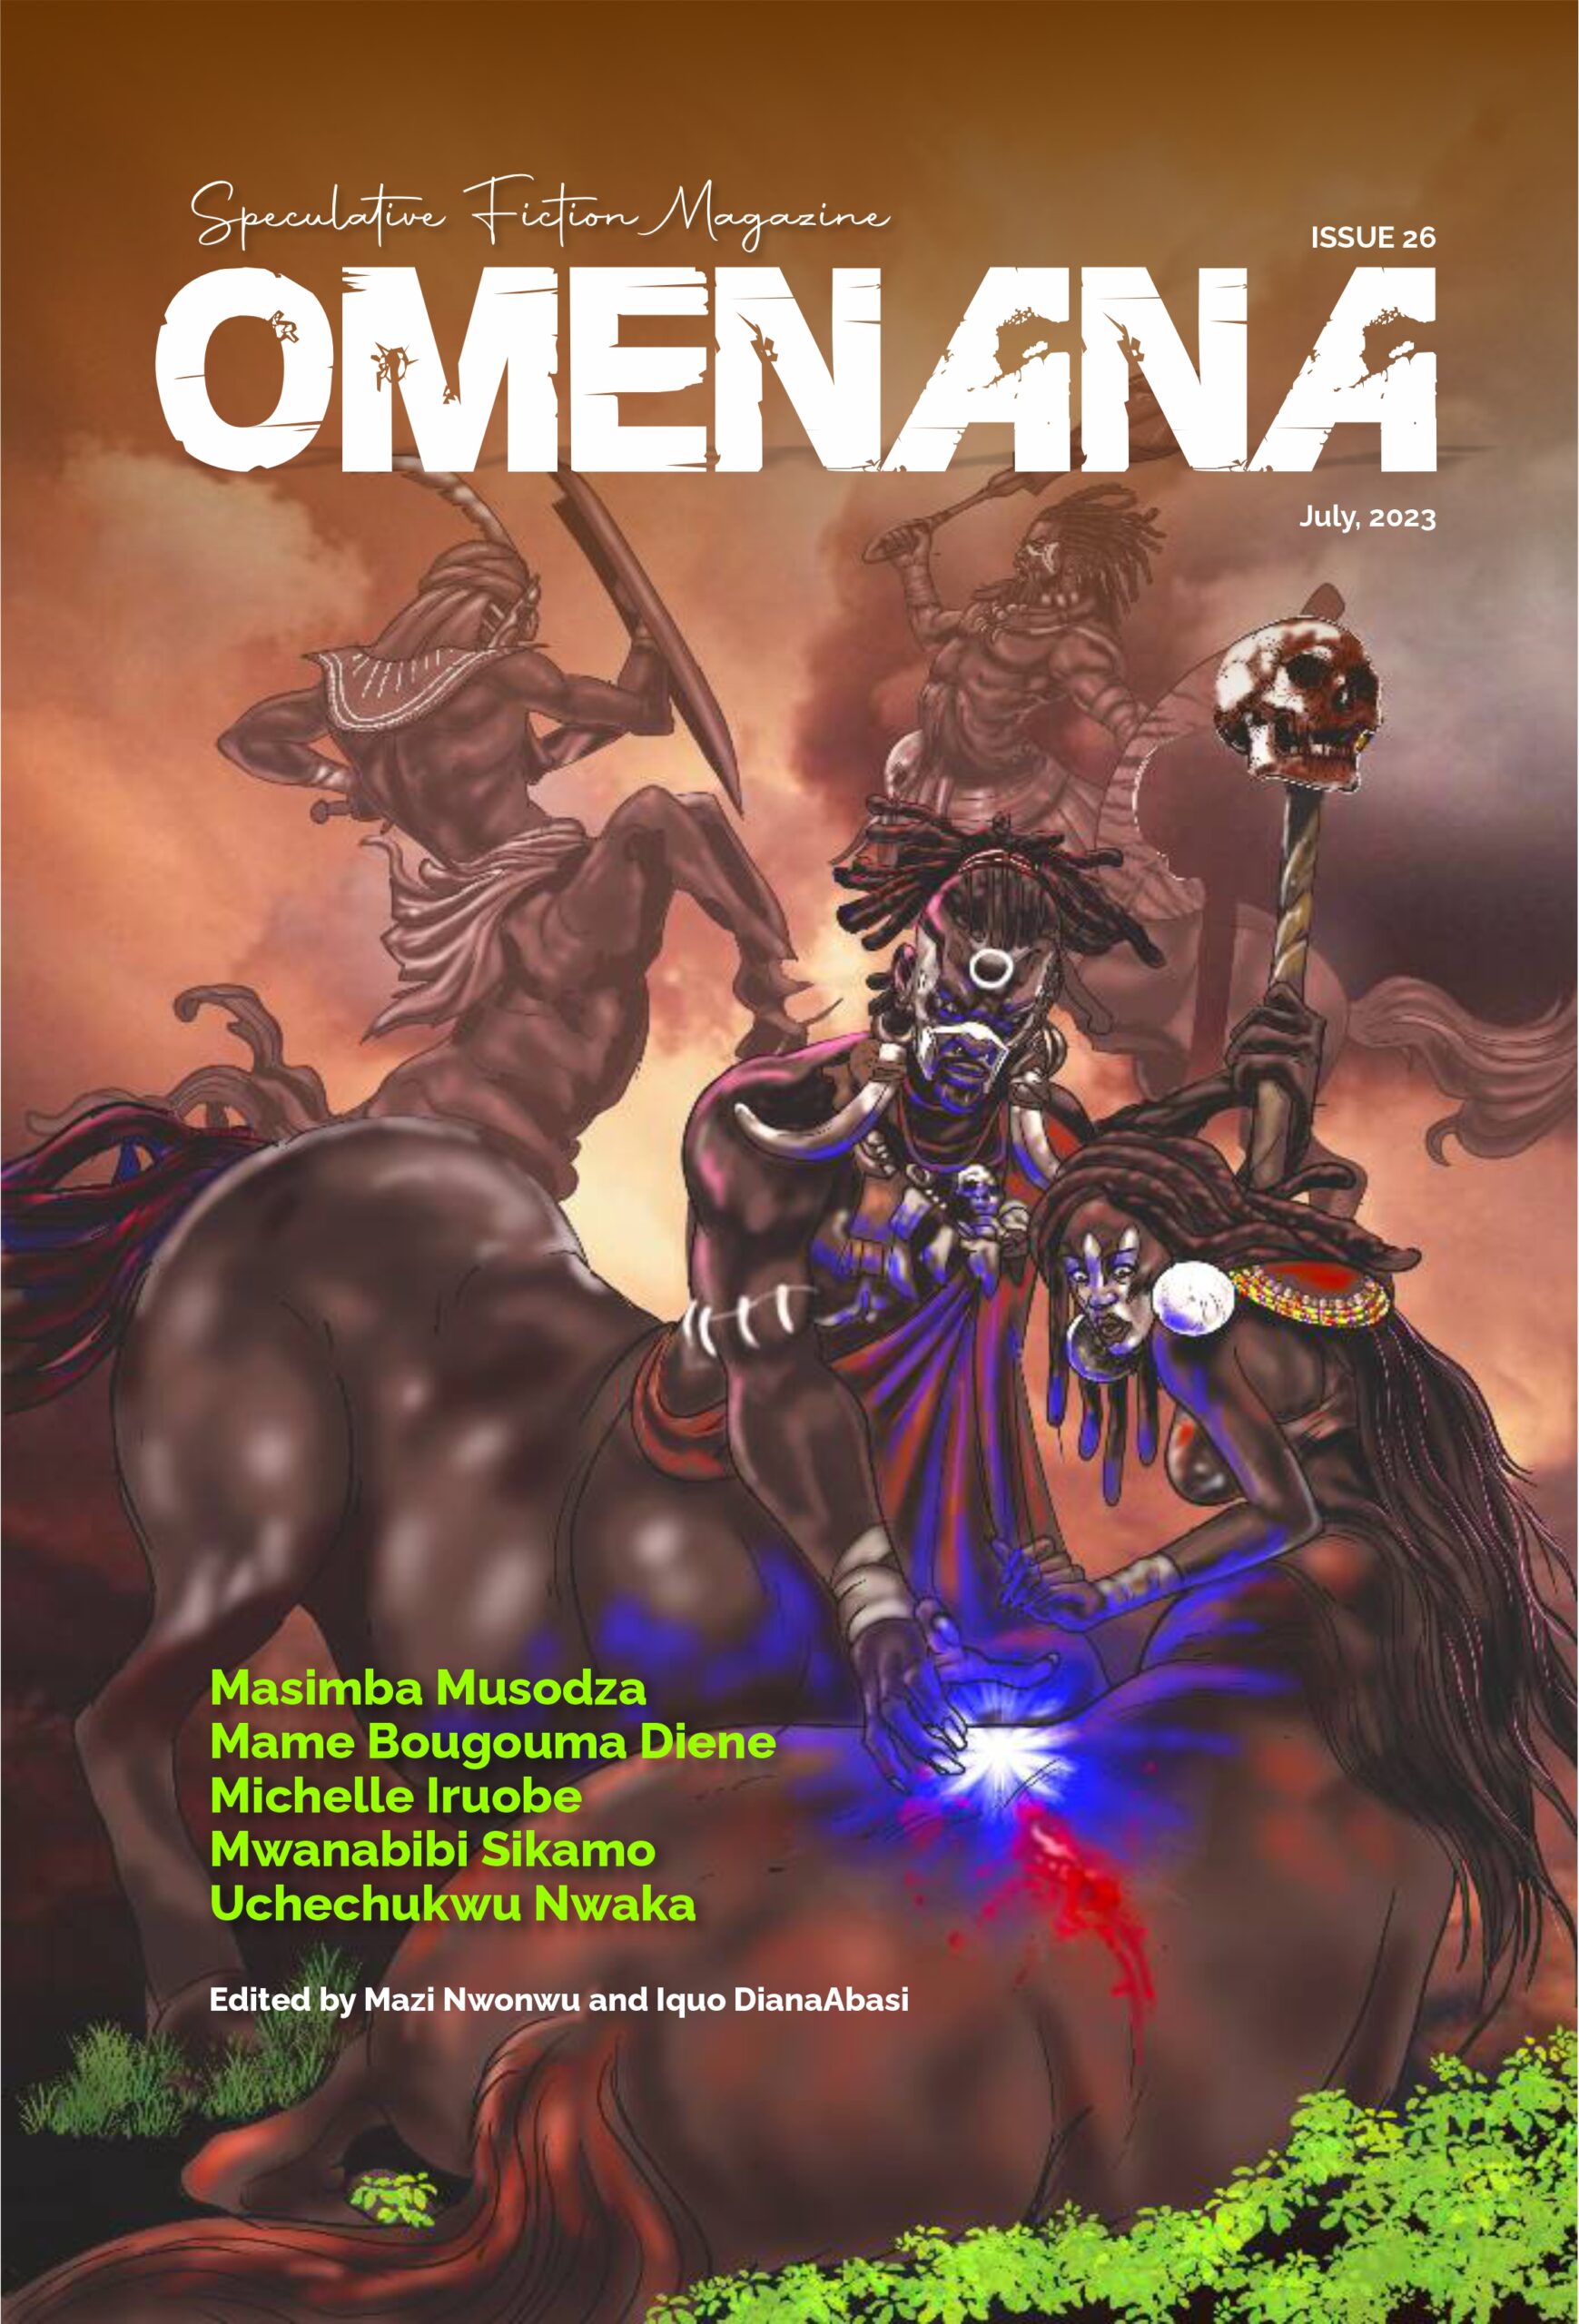 Cover for omenana issue 26 showing African centaurs in battle.